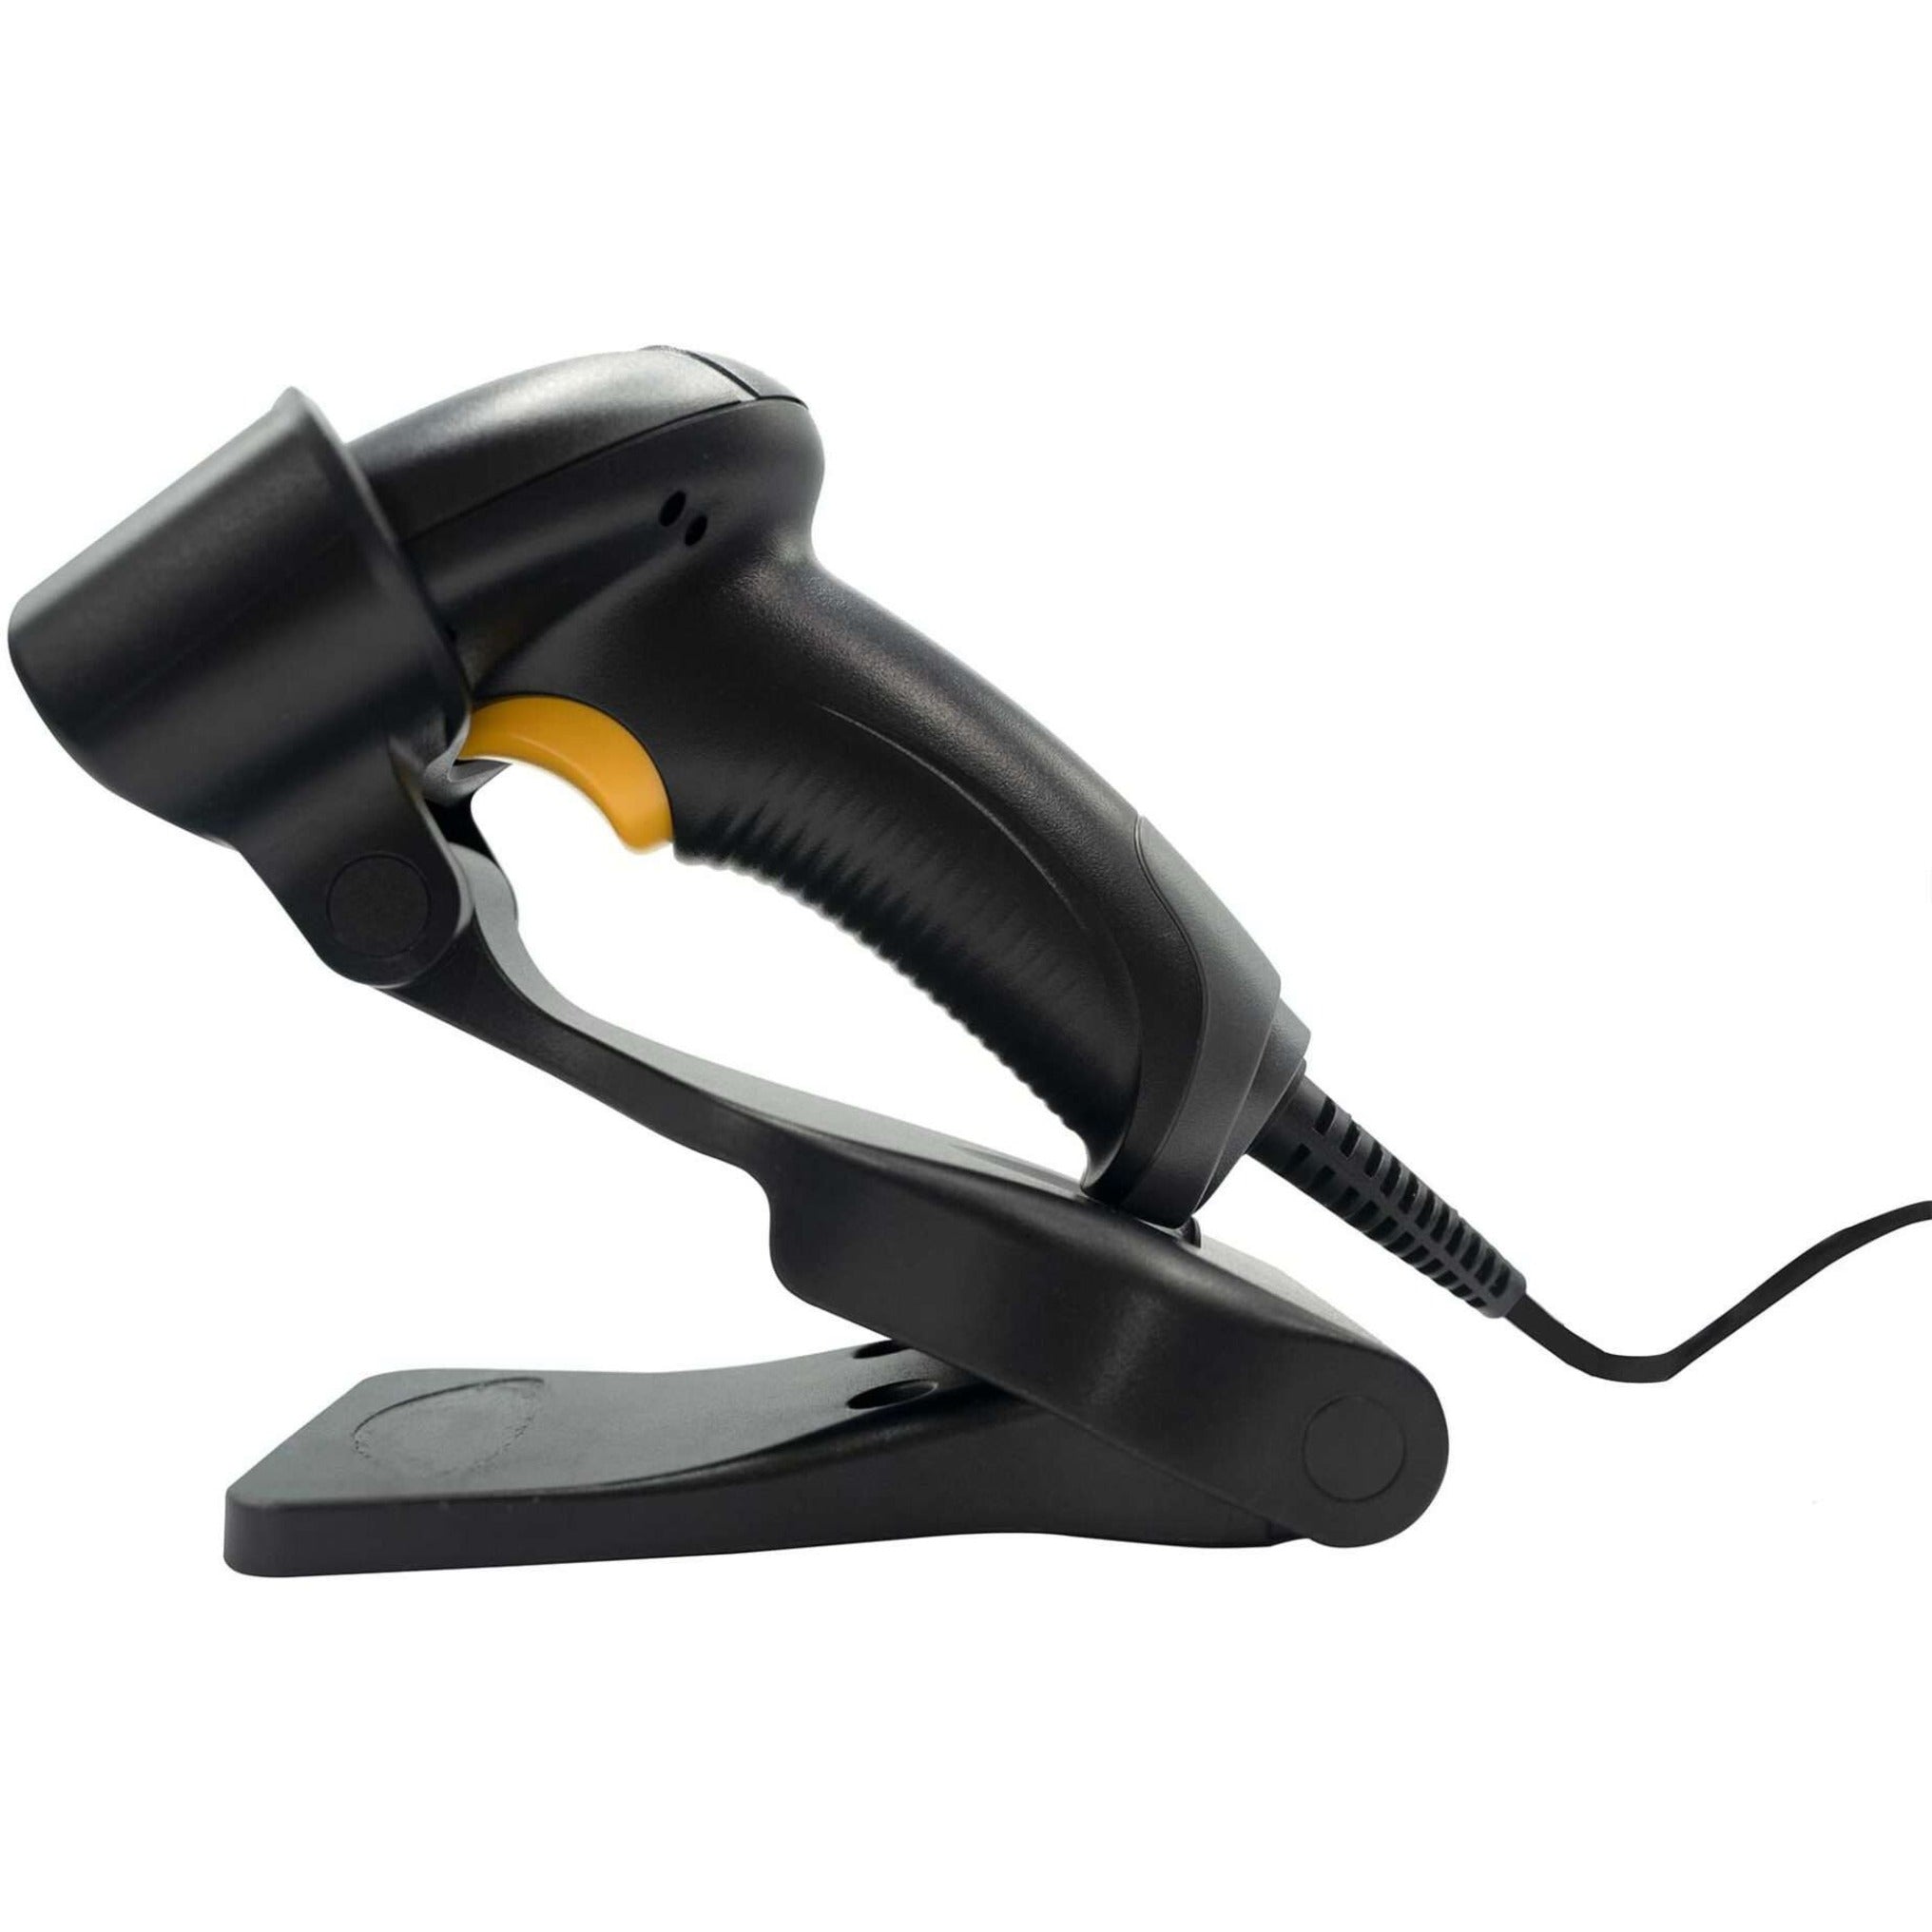 Star Micronics 37950450 Handheld Wired Barcode Scanner, 1D/2D Imager USB Cable Black with Stand [Discontinued]